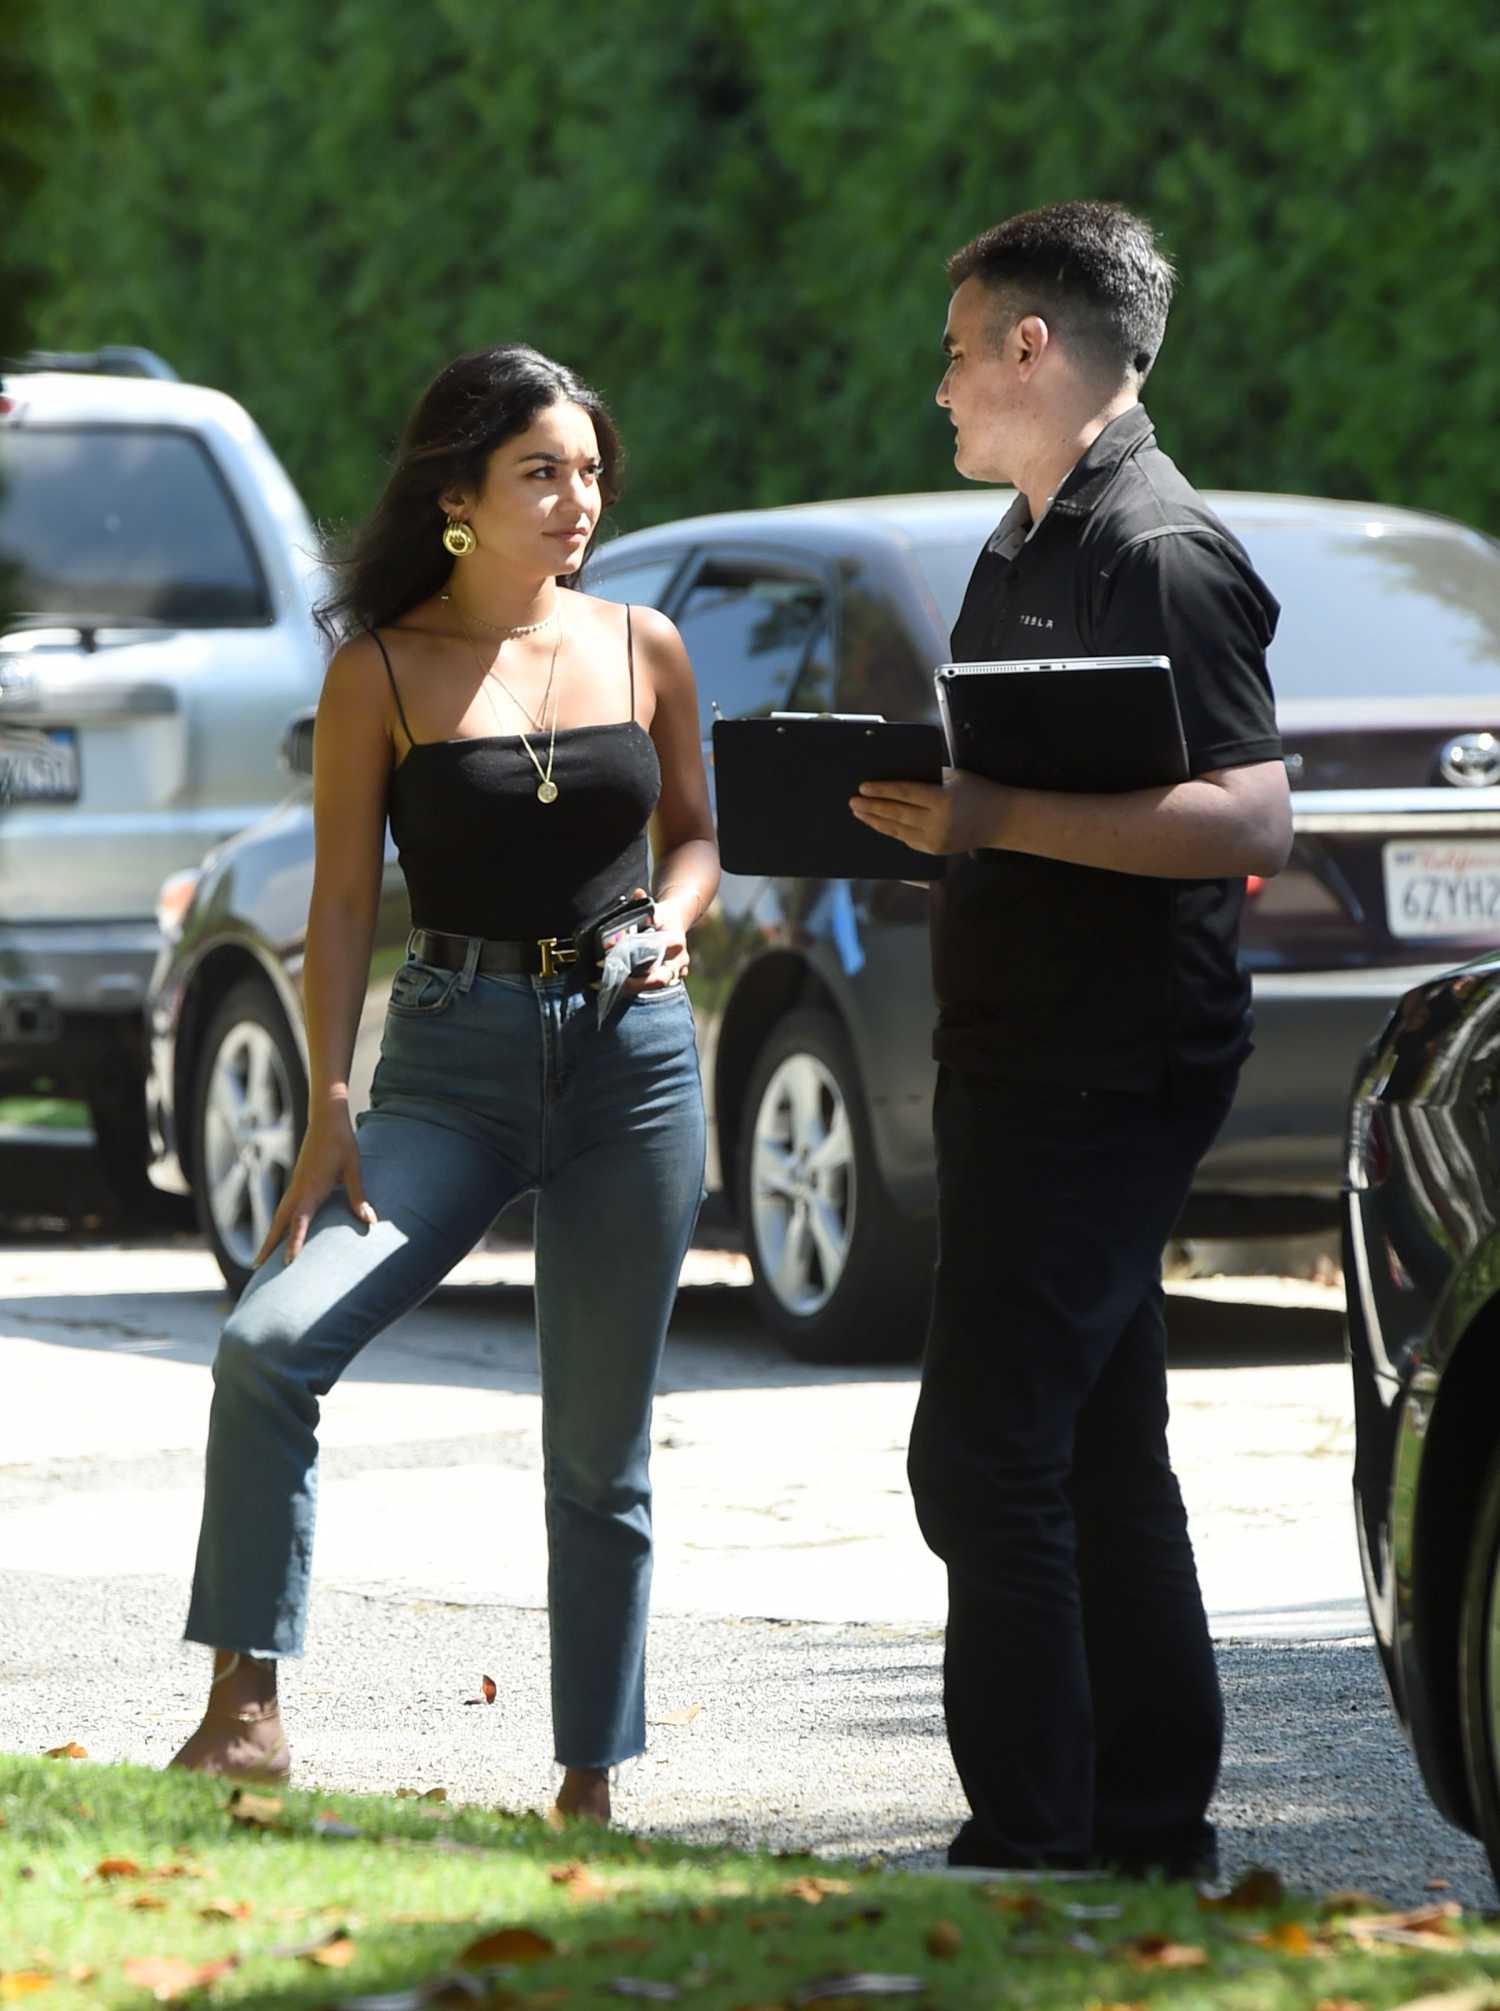 vanessa hudgens in a black top signs off on a brand new